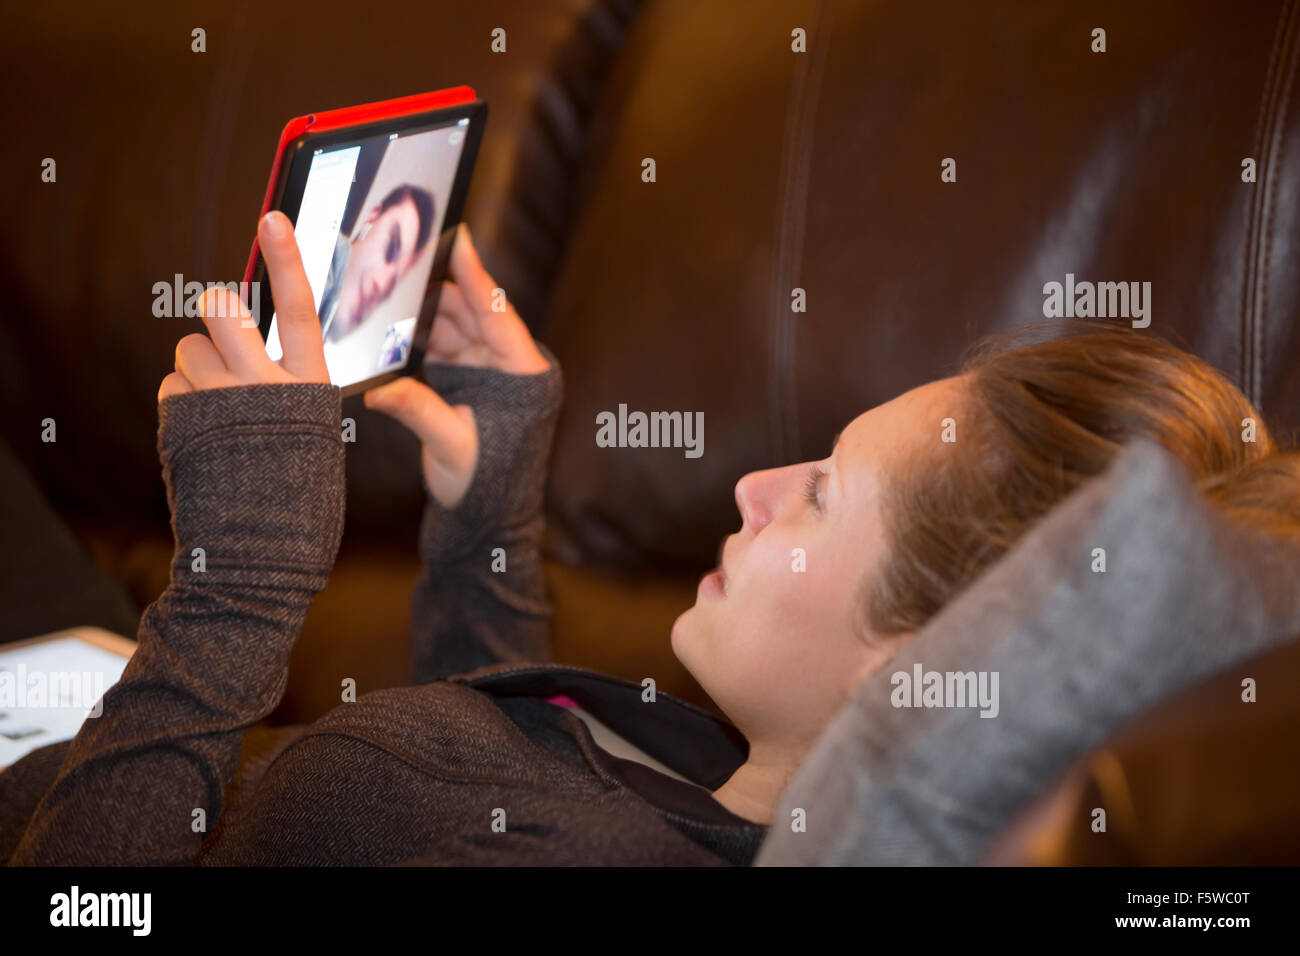 girl video chatting with boy on digital tablet computer Stock Photo